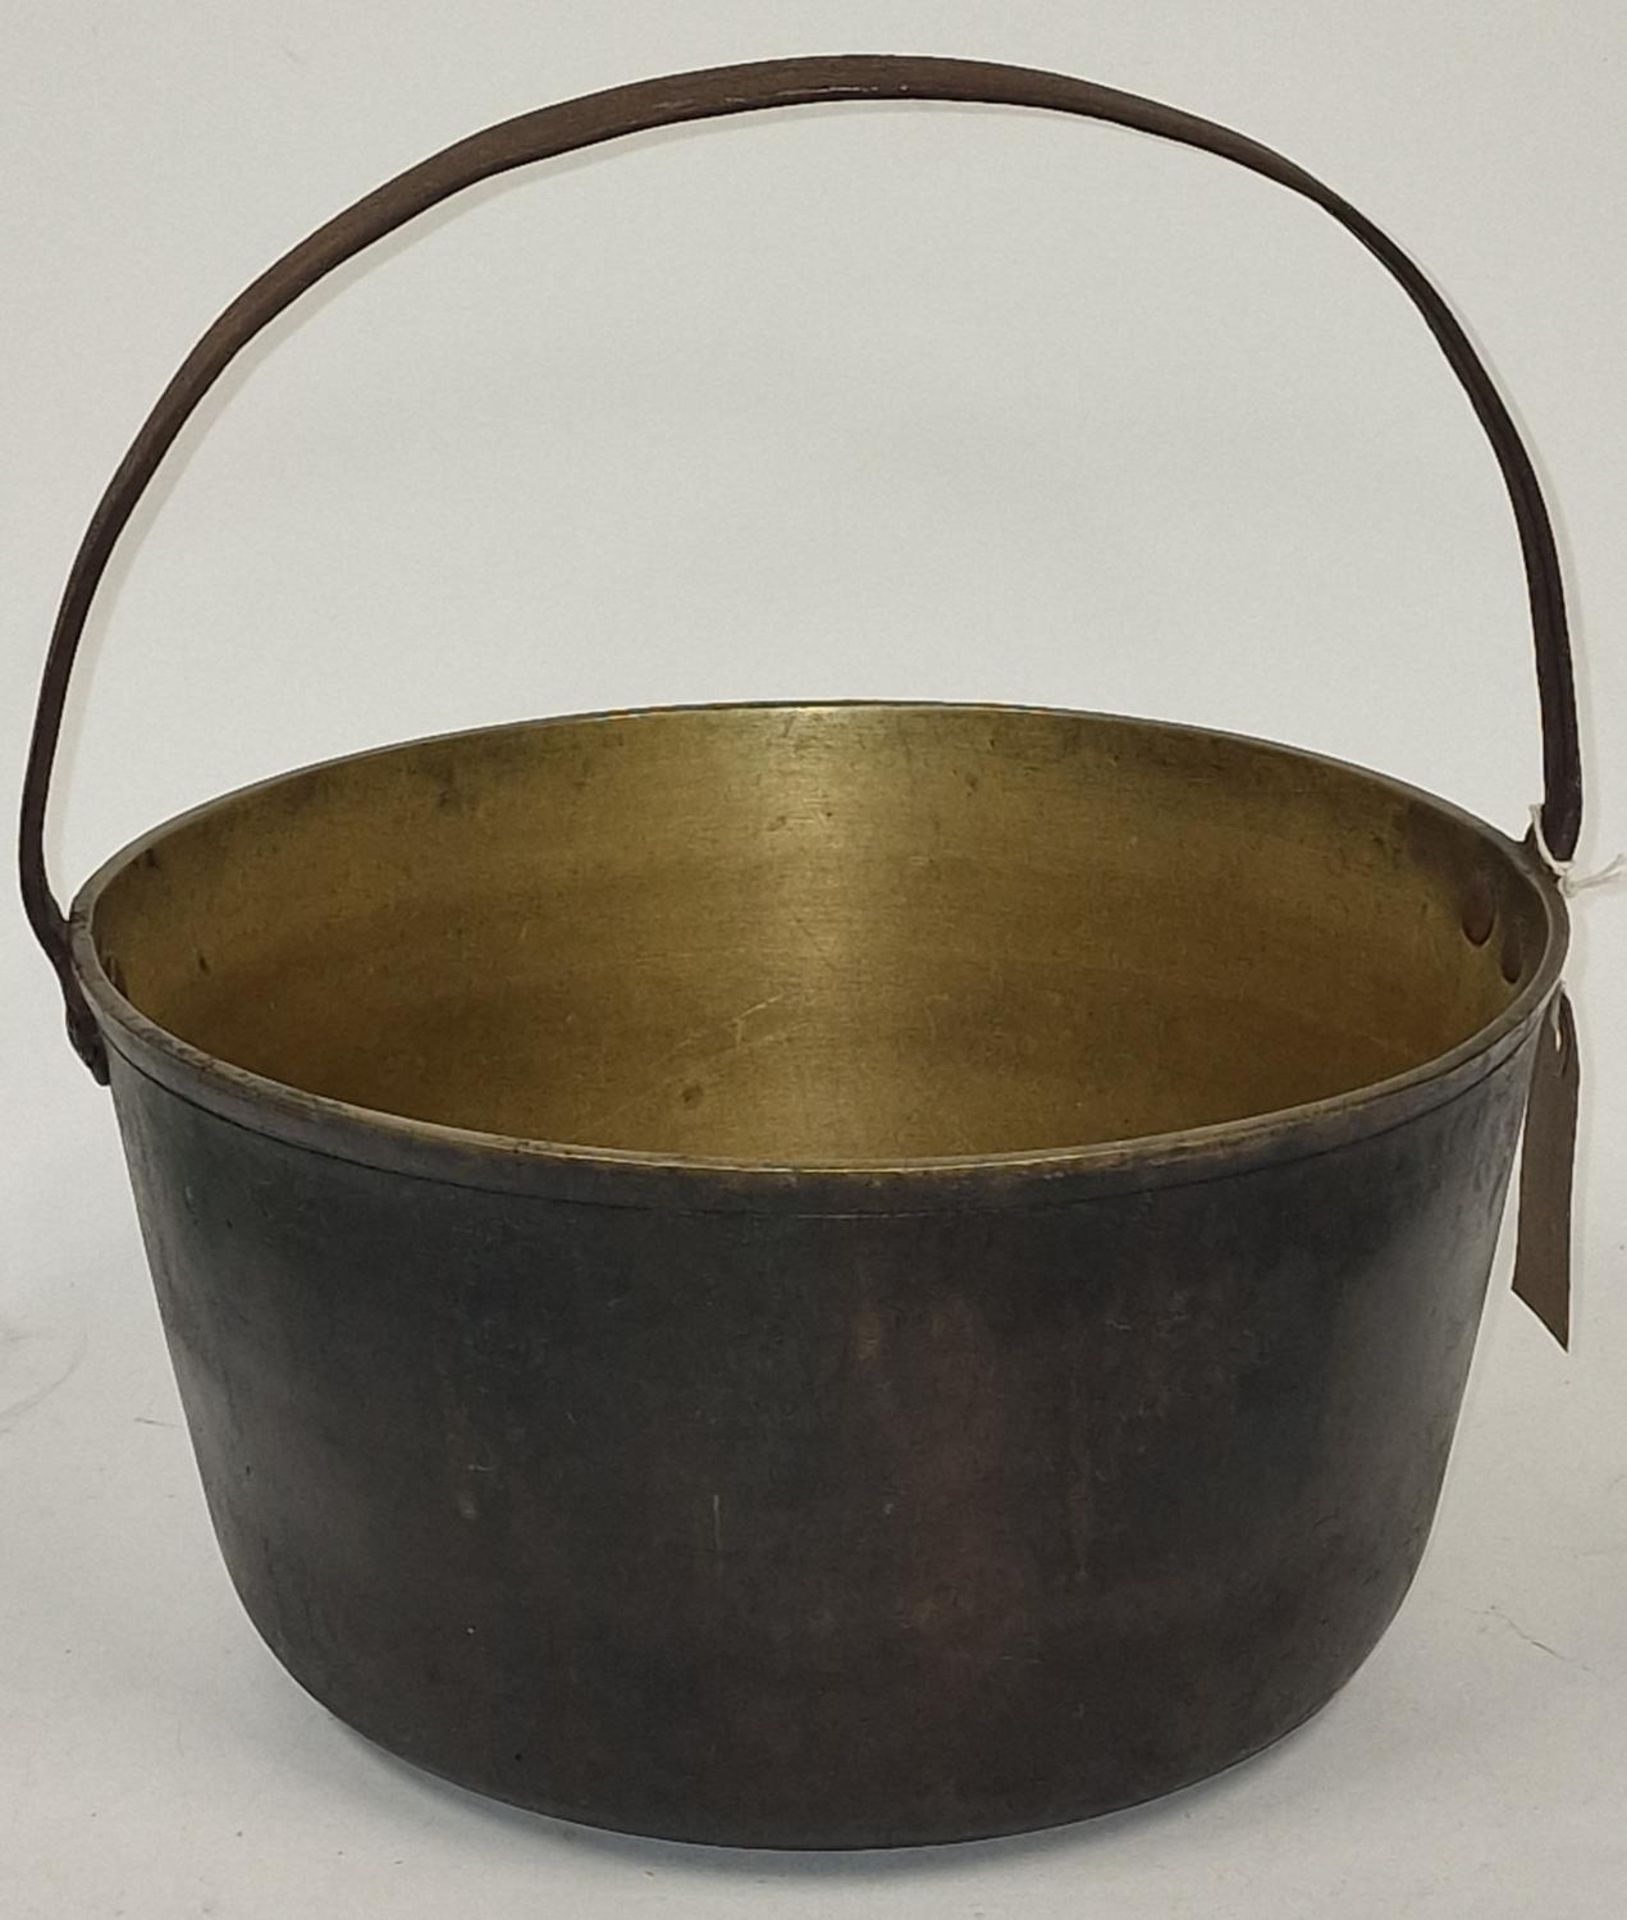 Antique heavy brass English preserving pan with fixed iron loop handle circa 1800's 32x29x15cm.